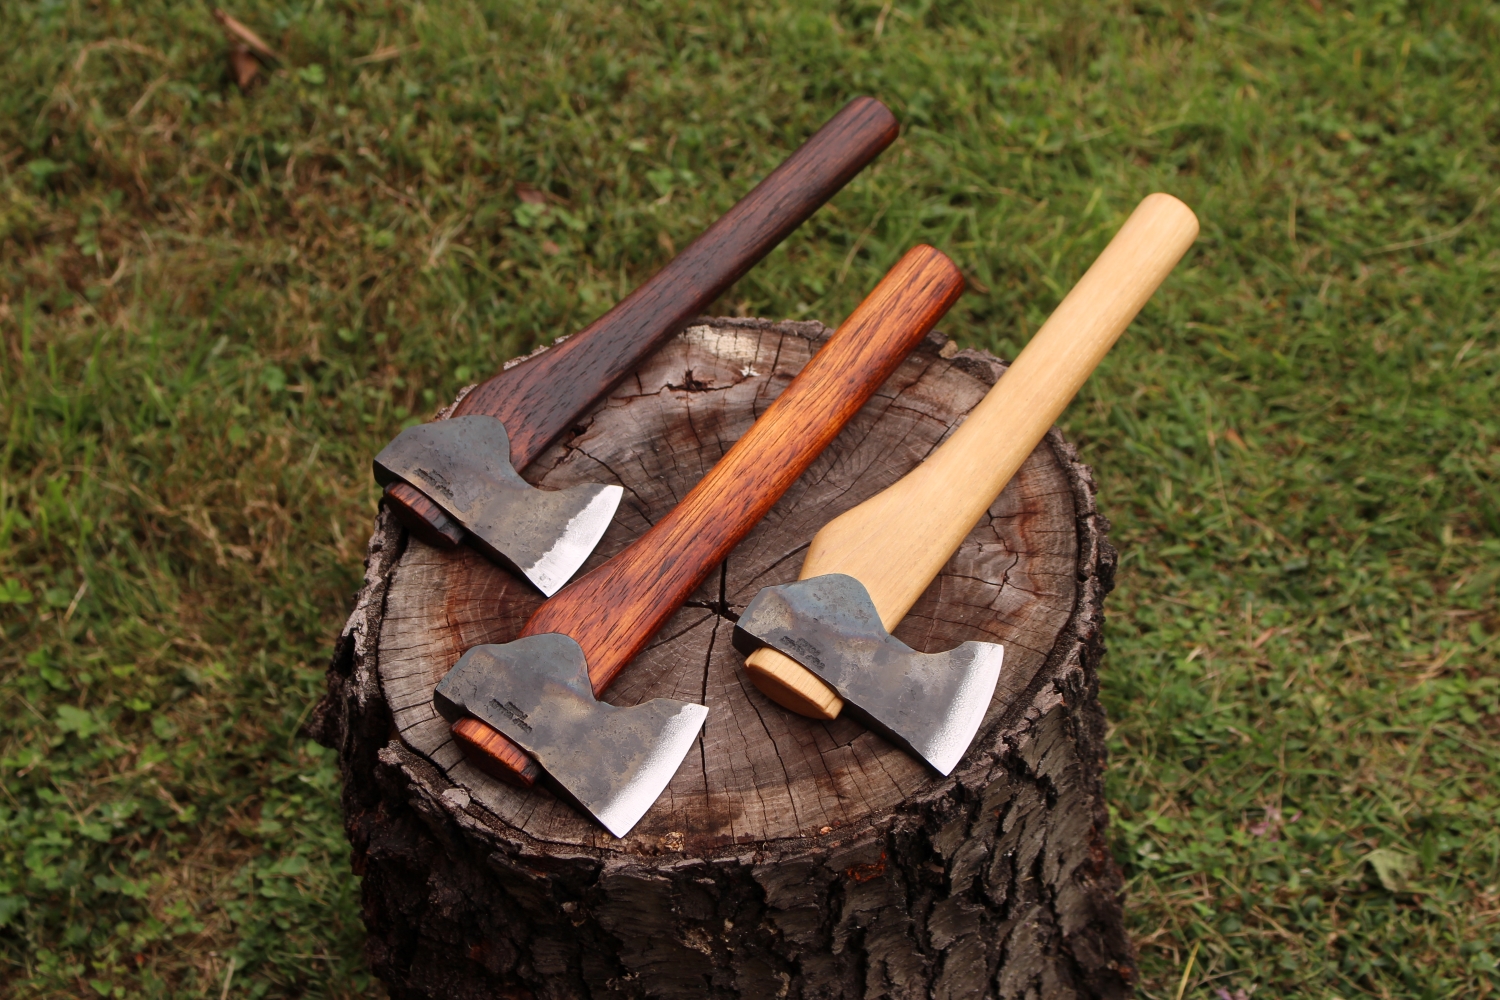 handmade, usa made, usa made axe, hatchet, chopping, wood chopping, outdoor, outdoorsman, survival, backwoodsman, hickory, axe made in america, axes made in the usa, ike bullington, wolf valley forge, valley forge, pack axe, back packing, camping, trail axe, hunting axe, trappers axe, camp axe, bush axe, belt axe, pack axe, leather shoulder rig, chopping axe, leather axe carrier, shoulder sling for axe, carpenter's axe, Wolf Valley Forge, Wolf Valley Forge axe release, Axe Wax, haversack, go bag, man purse, man bag, canvas bag, reenactor, reenacting, Trekker Axe, Axe Life, Splitting Wedge, Handforged Wedge